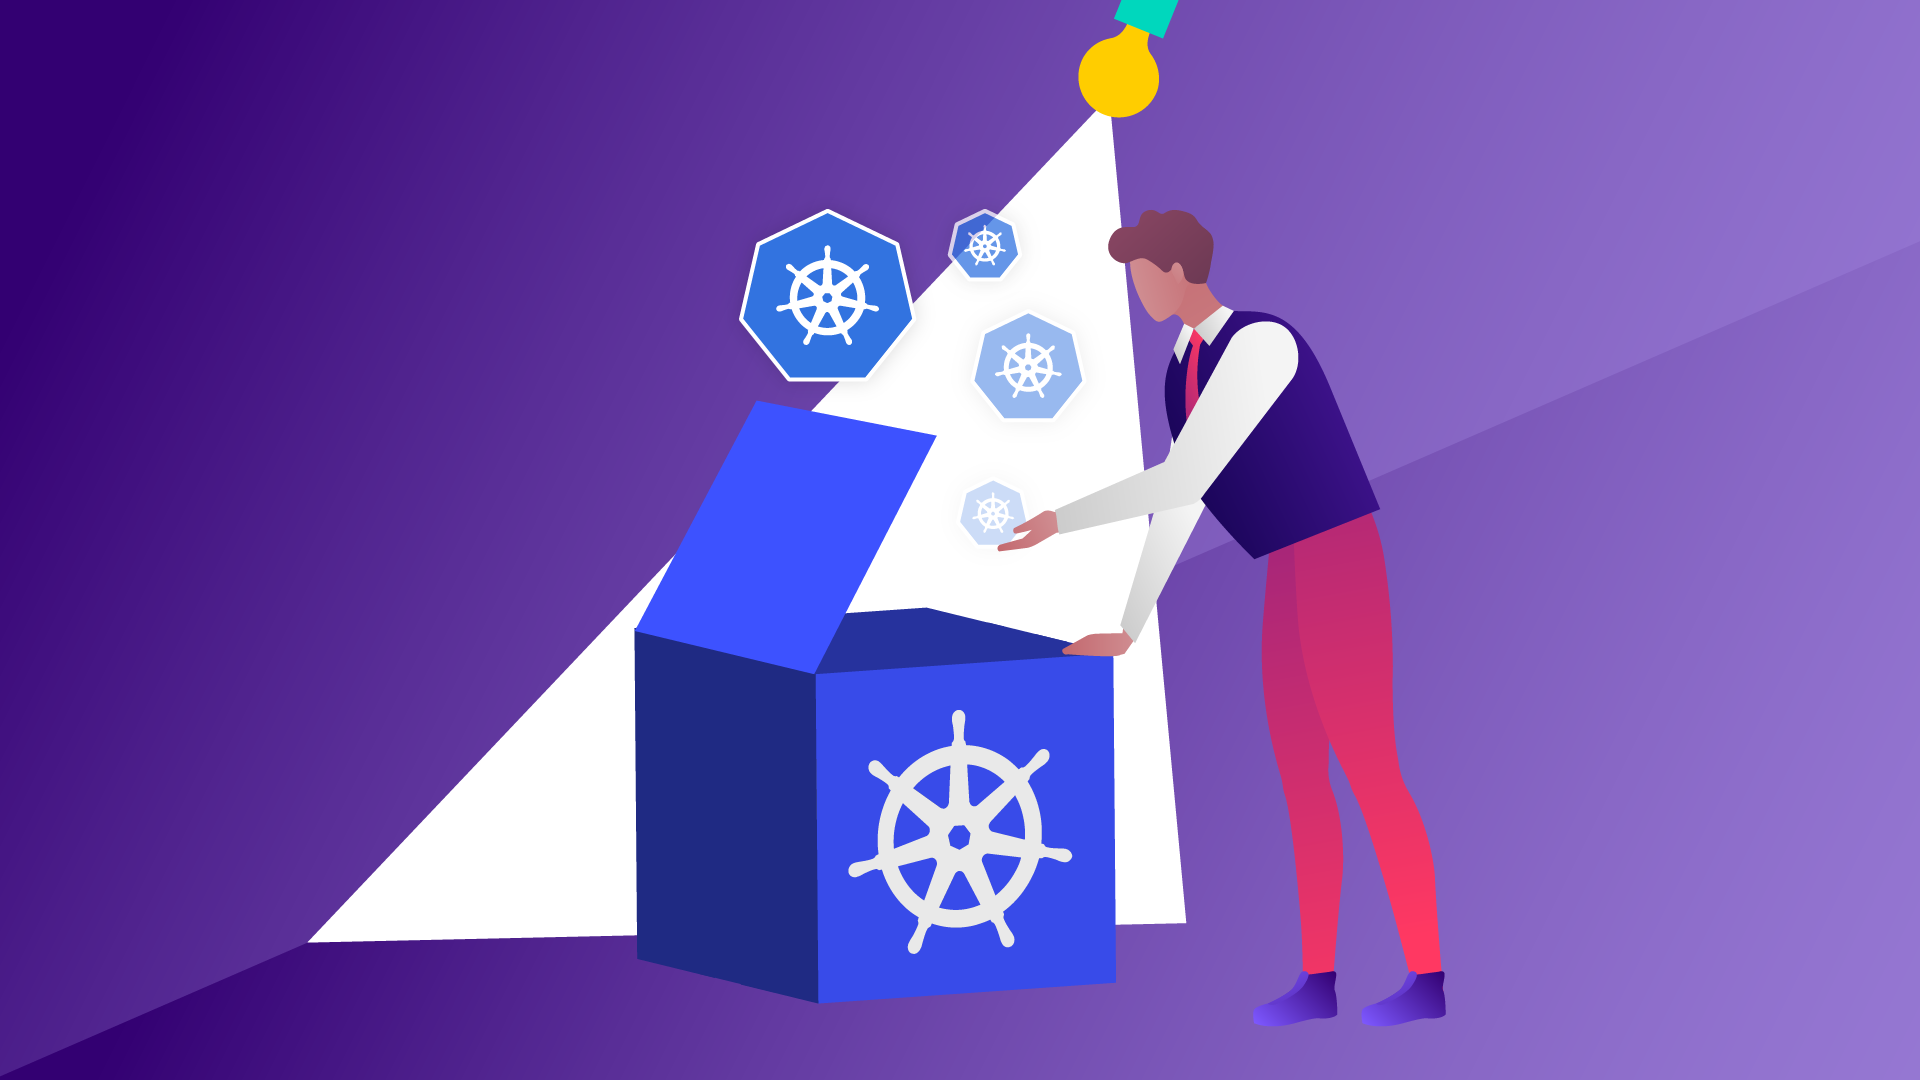 Spotlight on Kubernetes coming out of a box